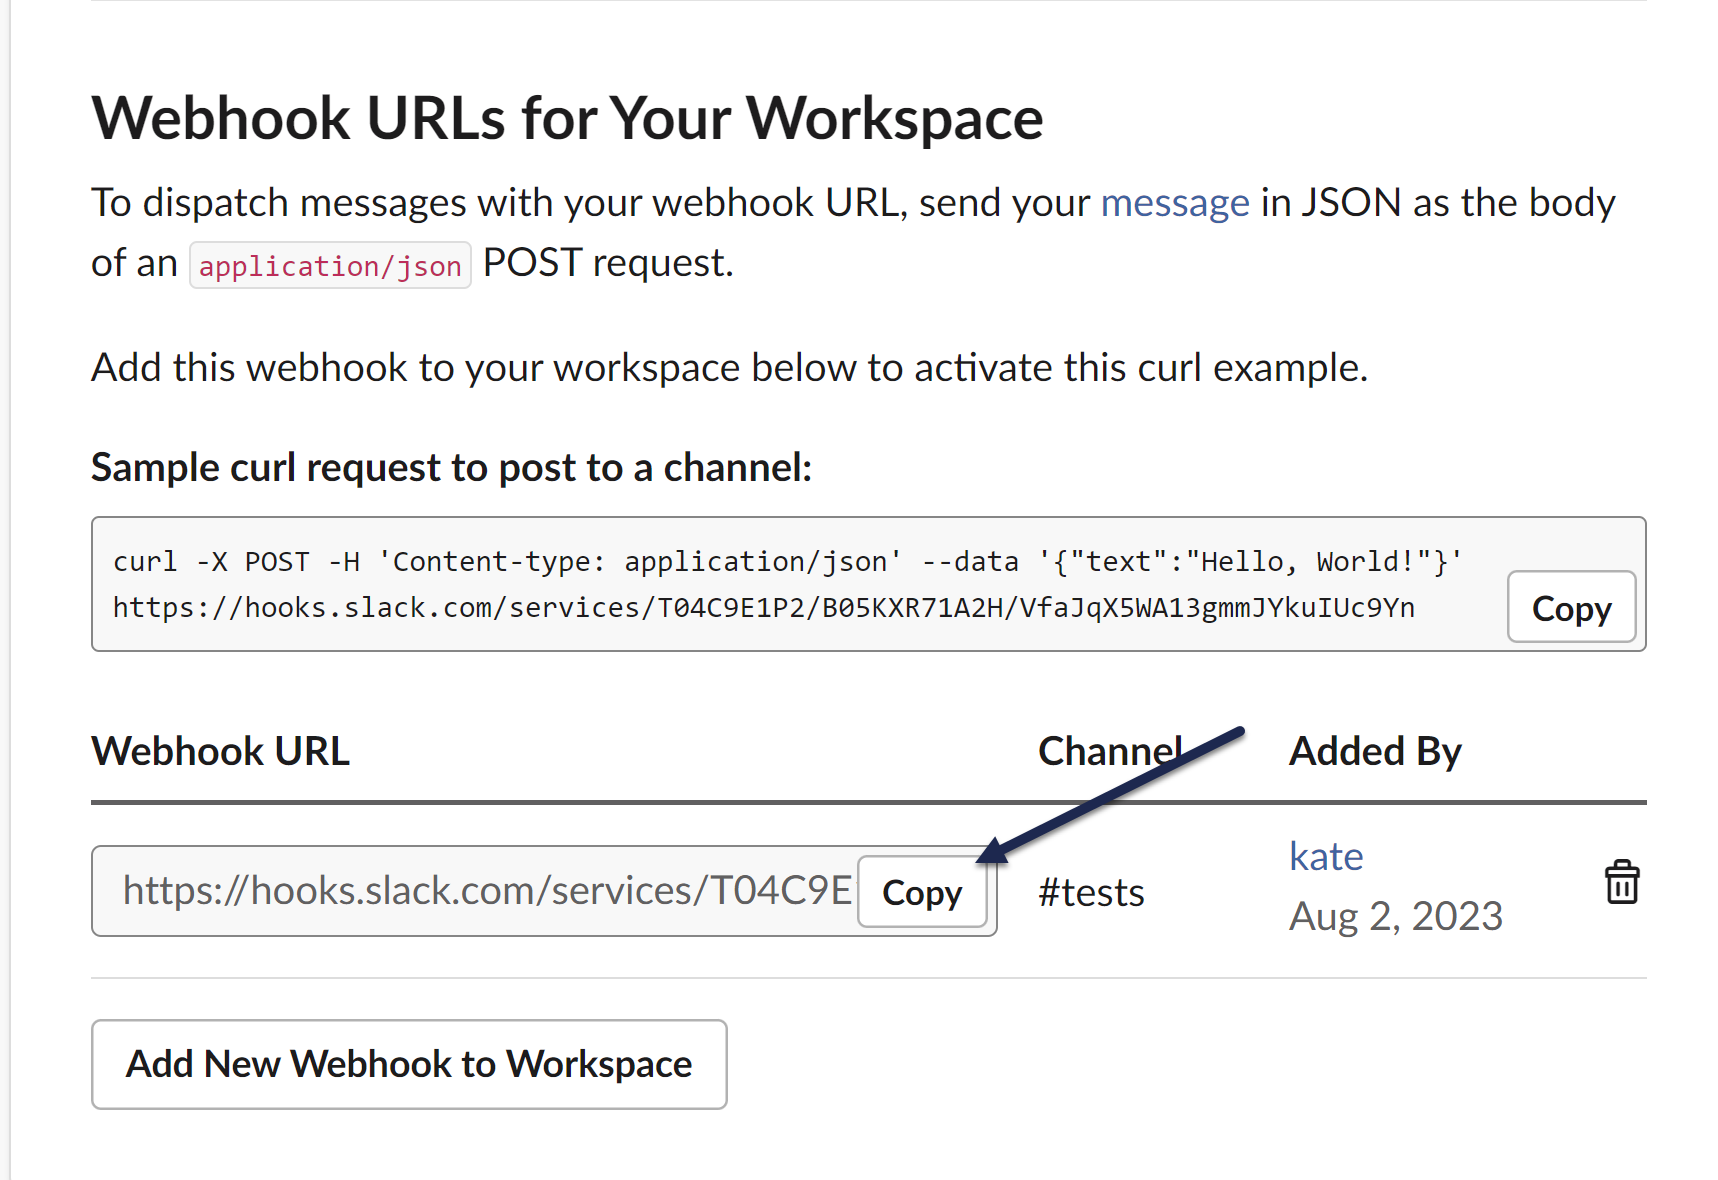 A screenshot of the Webhook URLs for YOur Workspace section. There is now a Webhook URL visible in the section and the screenshot shows an arrow pointing to the Copy button next to that URL